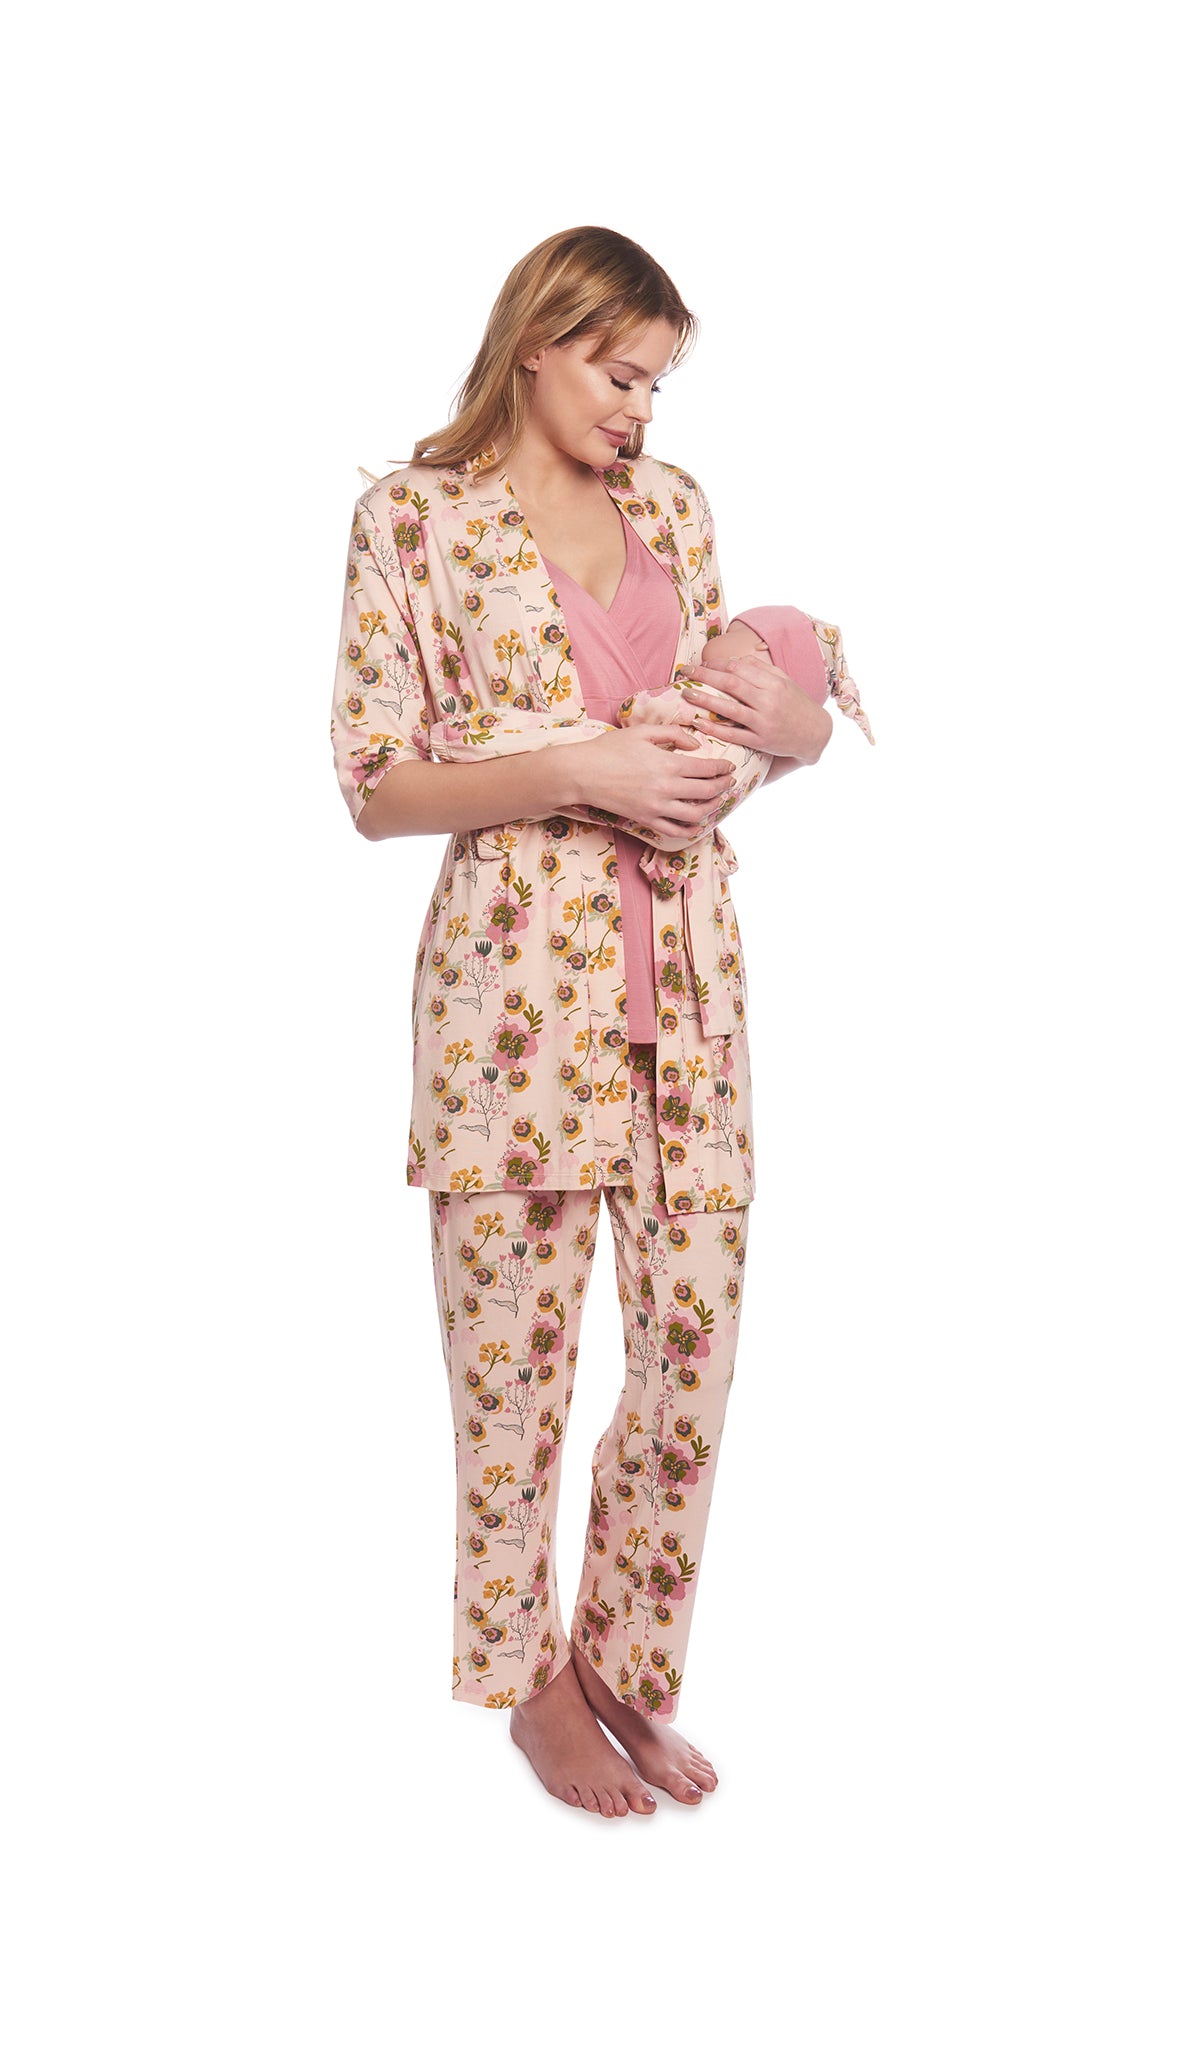 Camellia Analise 5-Piece Set. Woman wearing 3/4 sleeve robe, tank top and pant while holding a baby wearing baby gown and knotted baby hat.